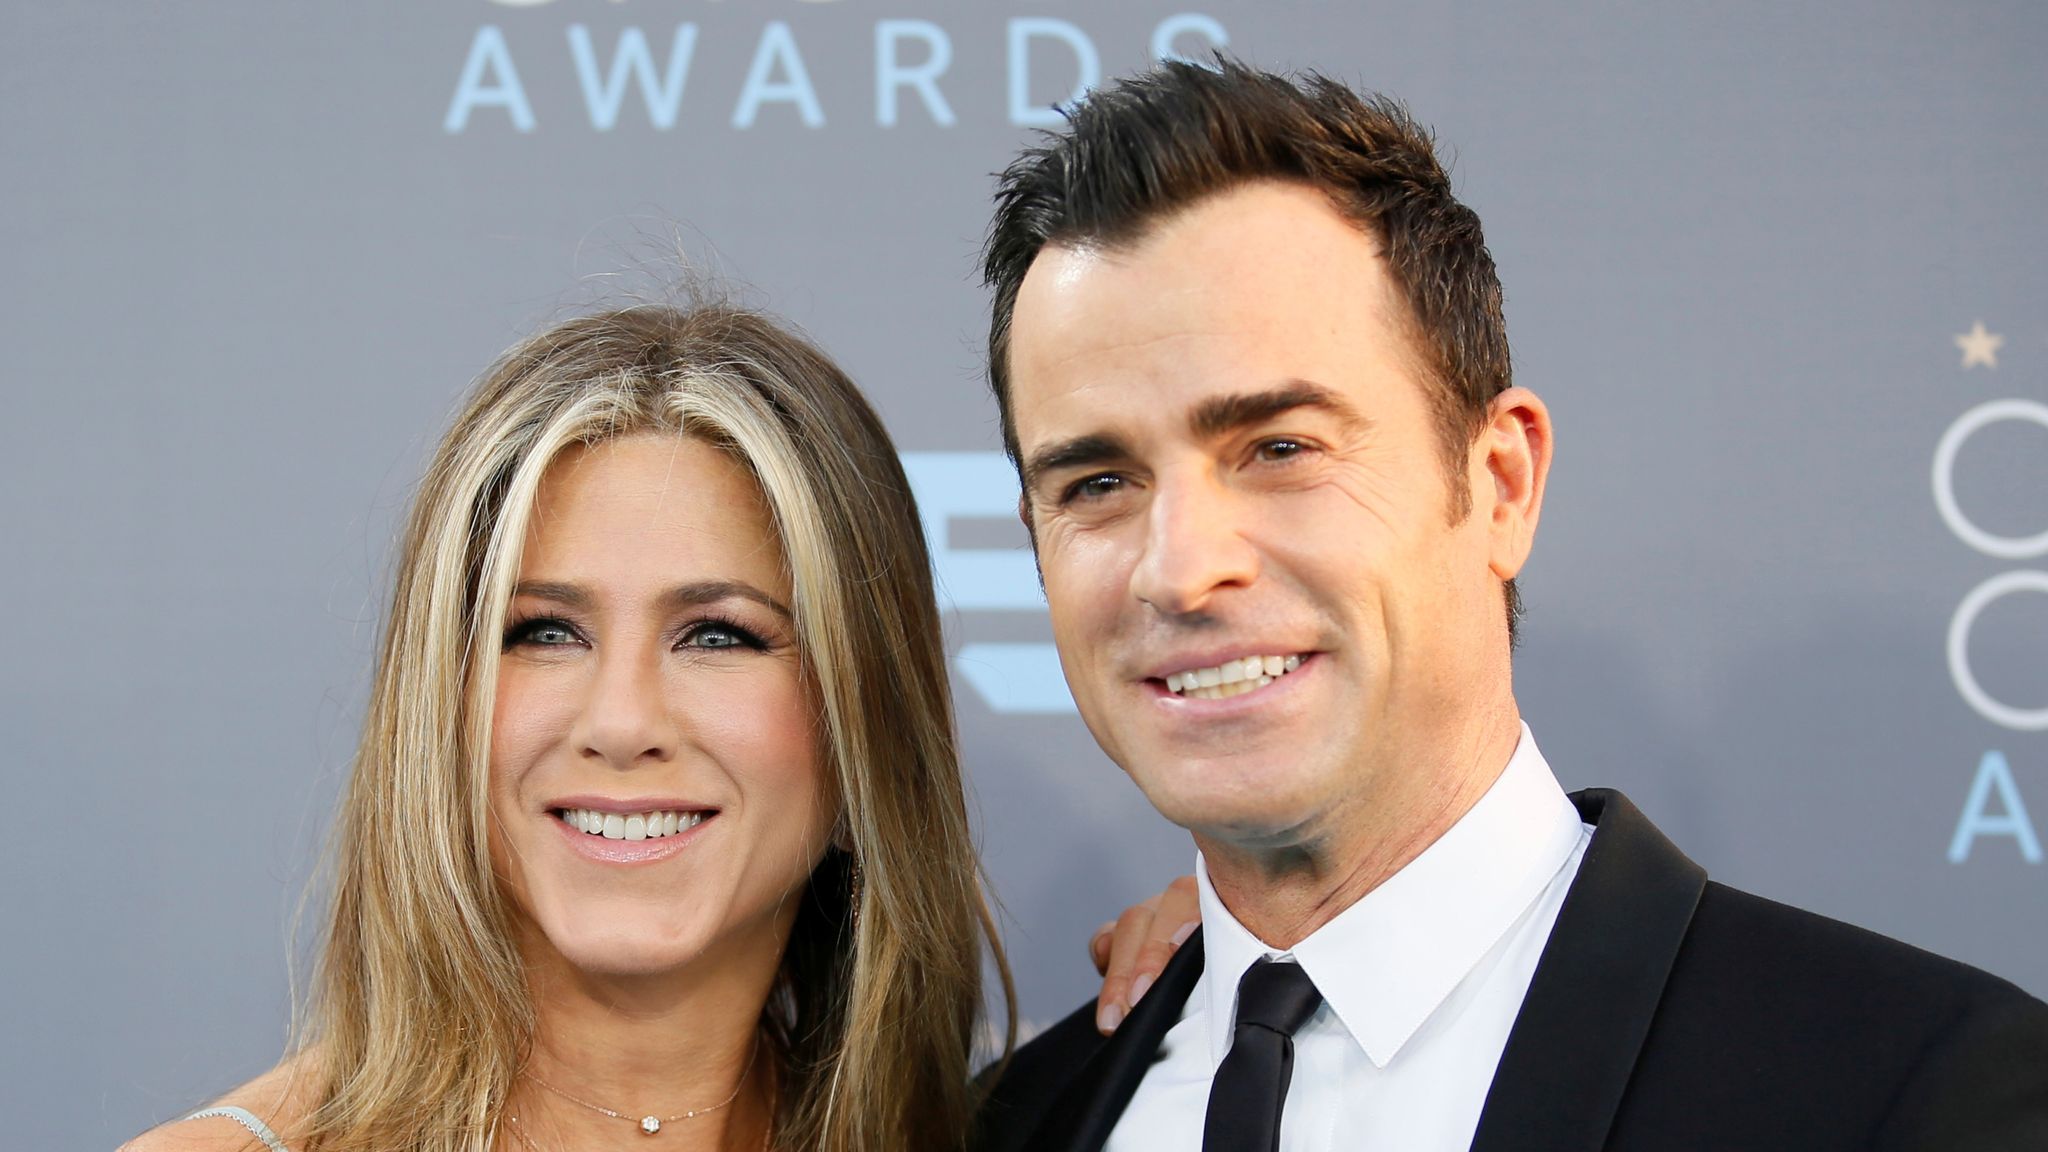 Jennifer Aniston and Justin Theroux: The Way They Were